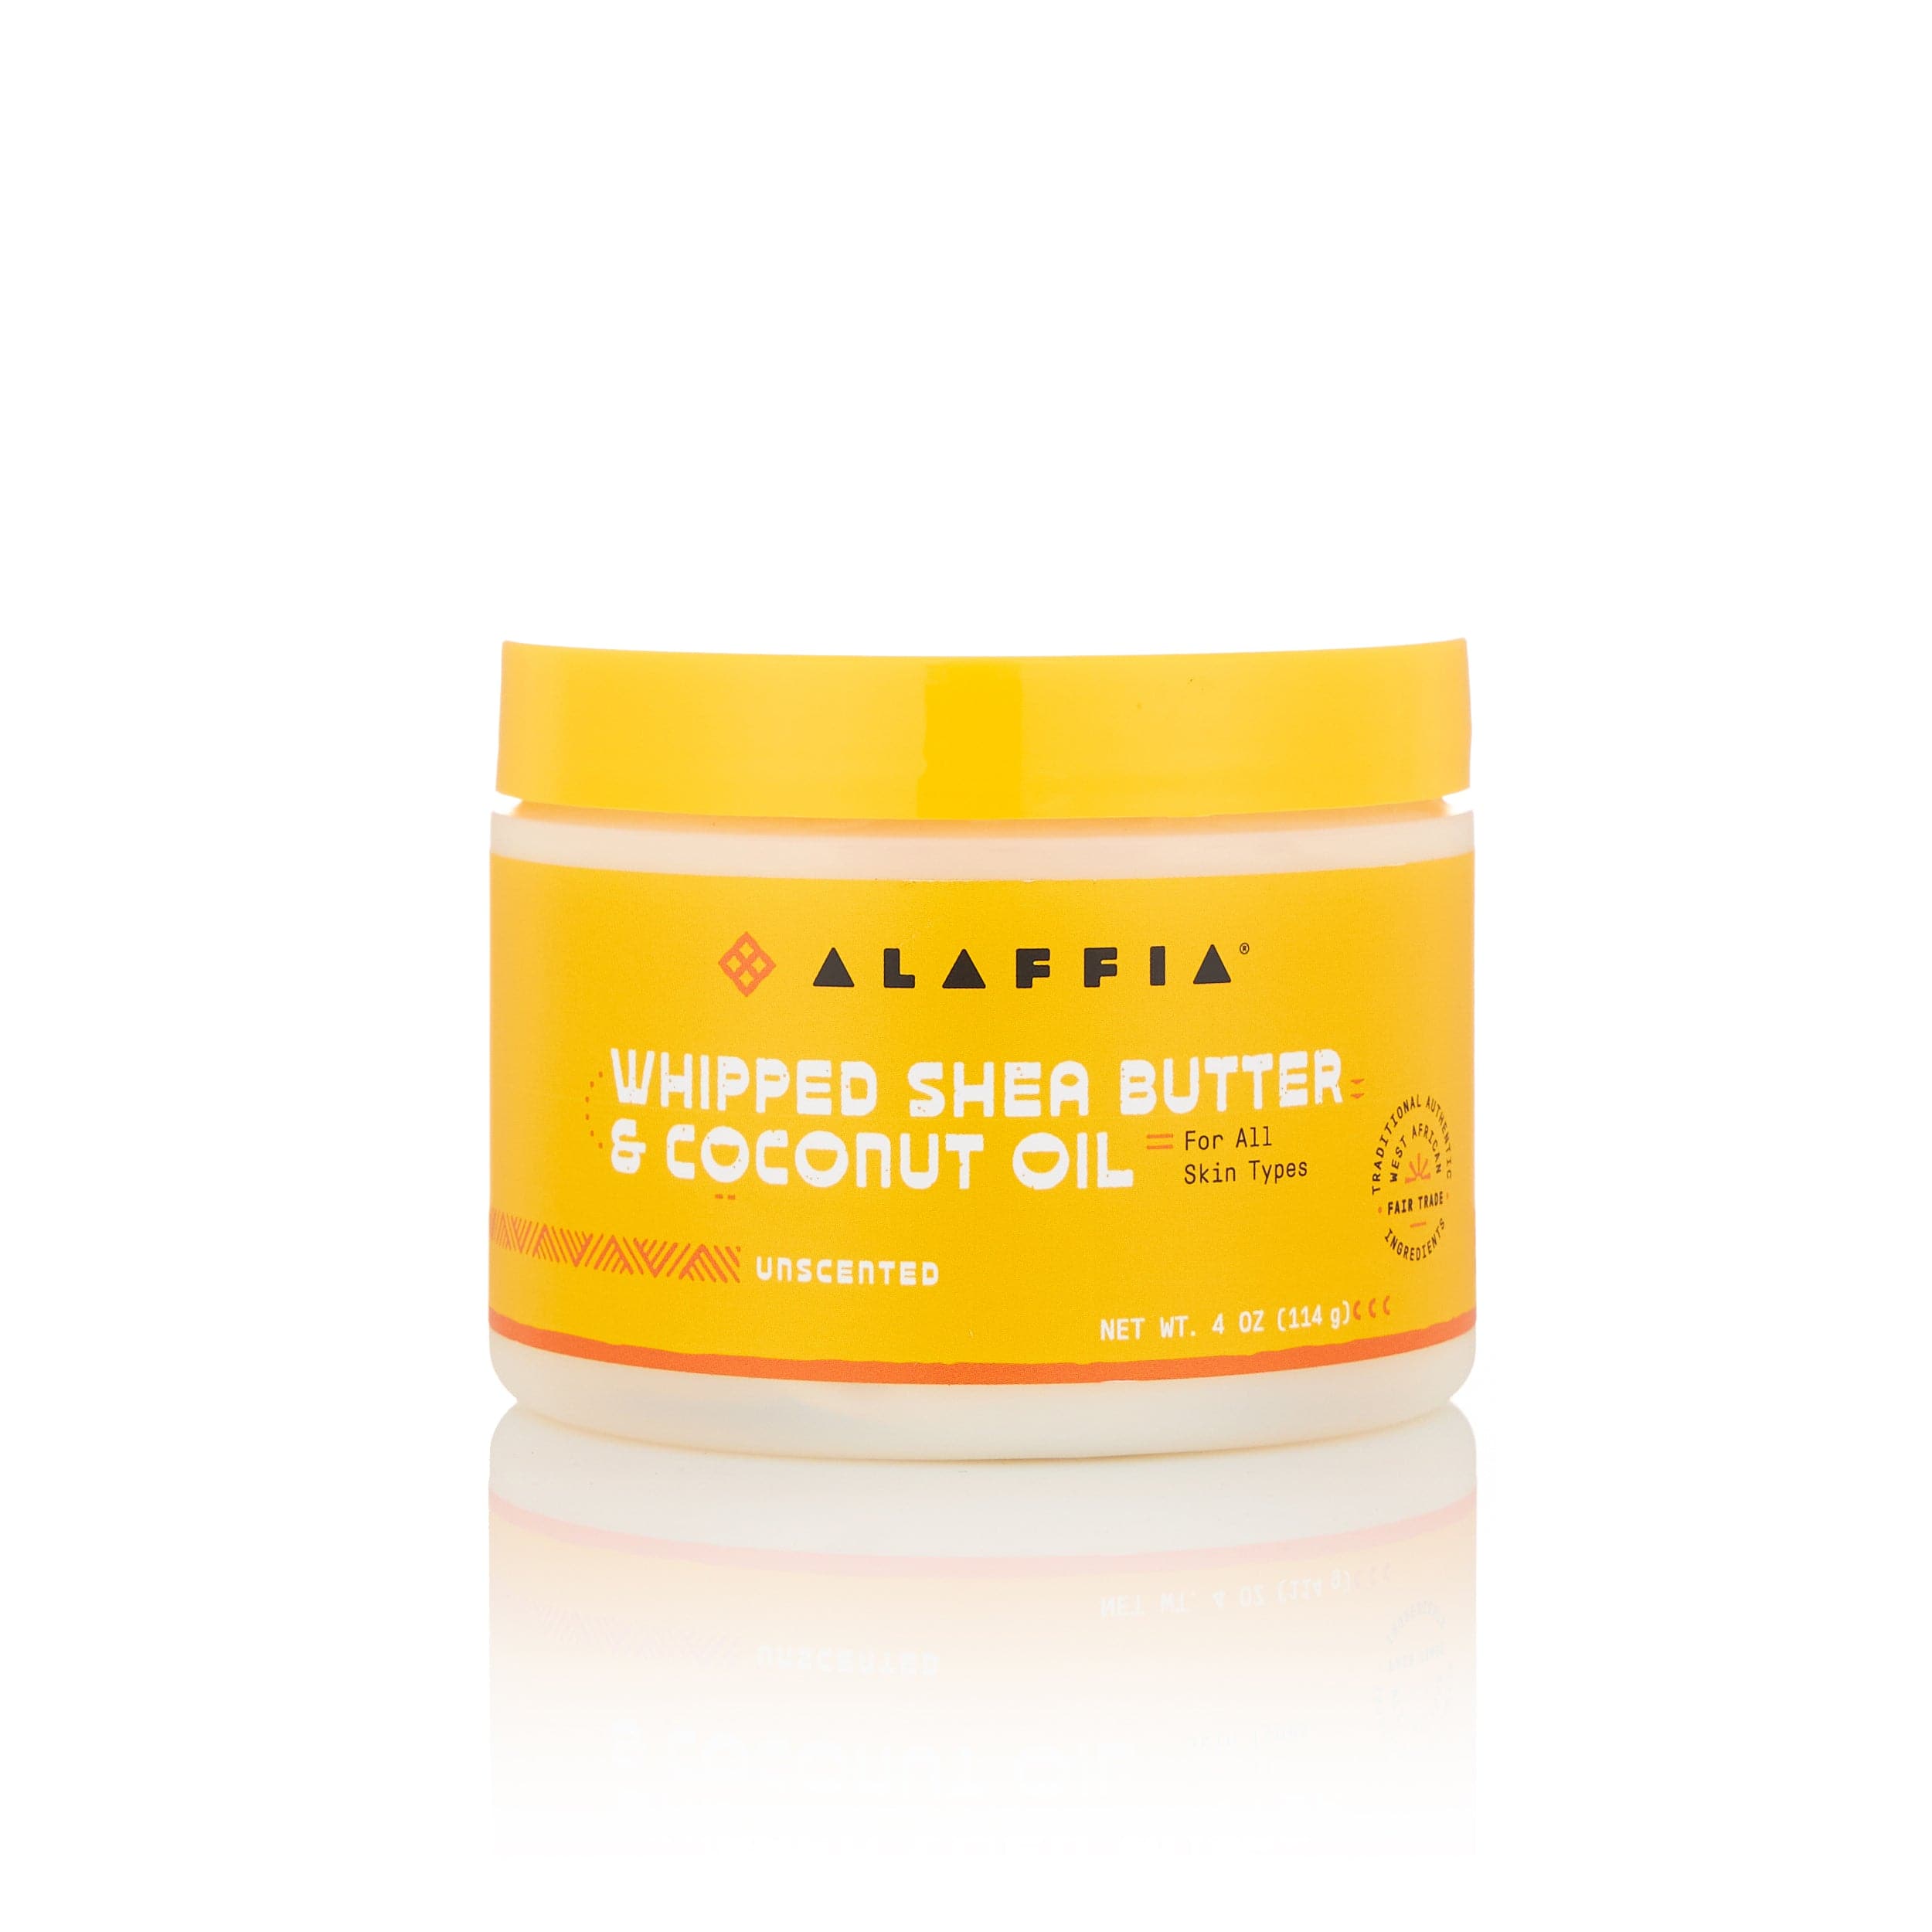 Whipped Shea Butter & Coconut Oil - Unscented 4 oz – Alaffia